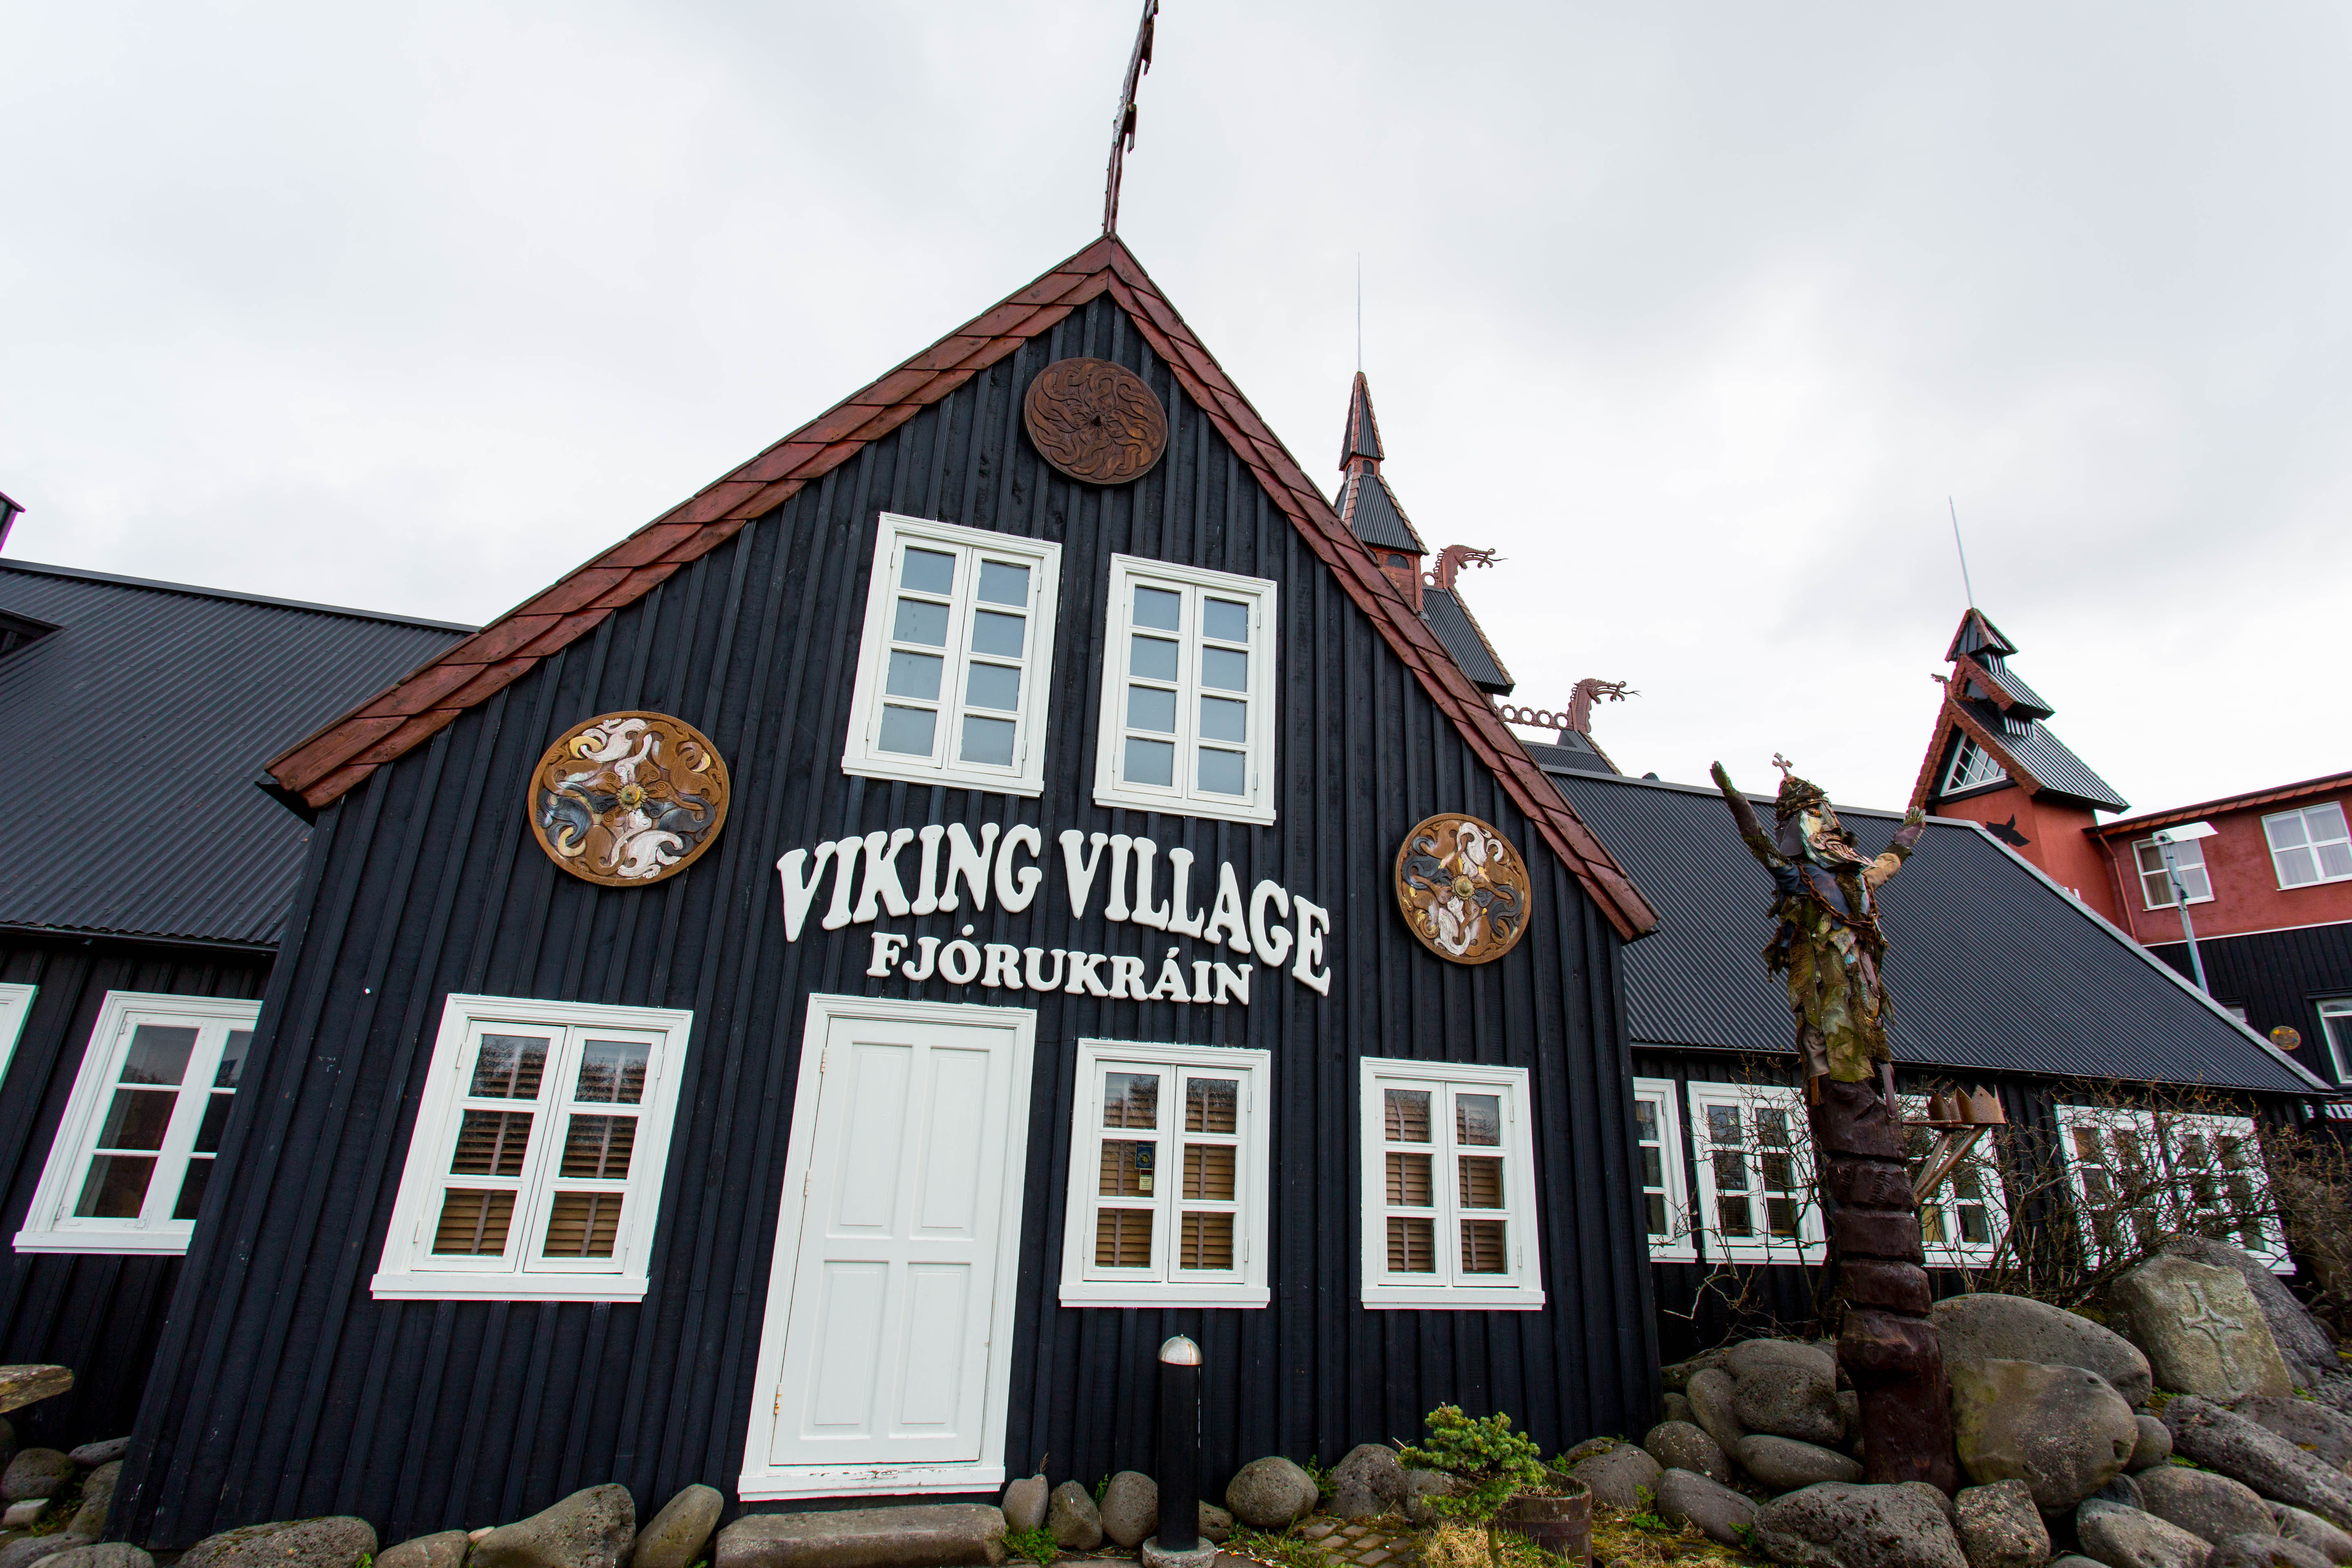 The Viking Village is an exhibition which provides an insight into the settlement period of Iceland.